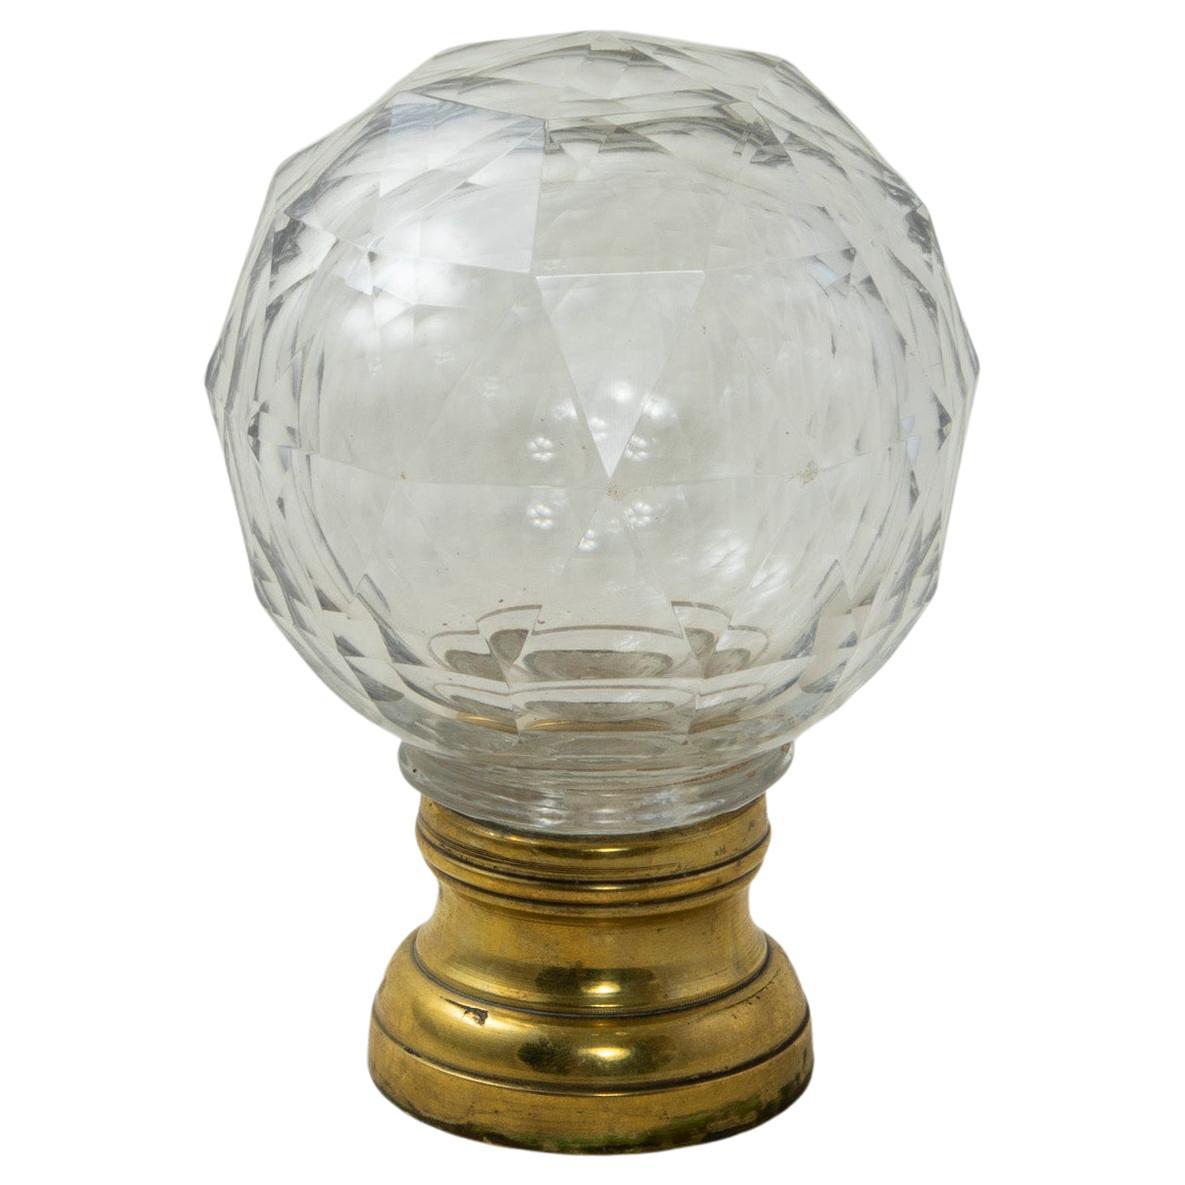 Early 20th Century French Art Deco Period Crystal and Brass Staircase Finial